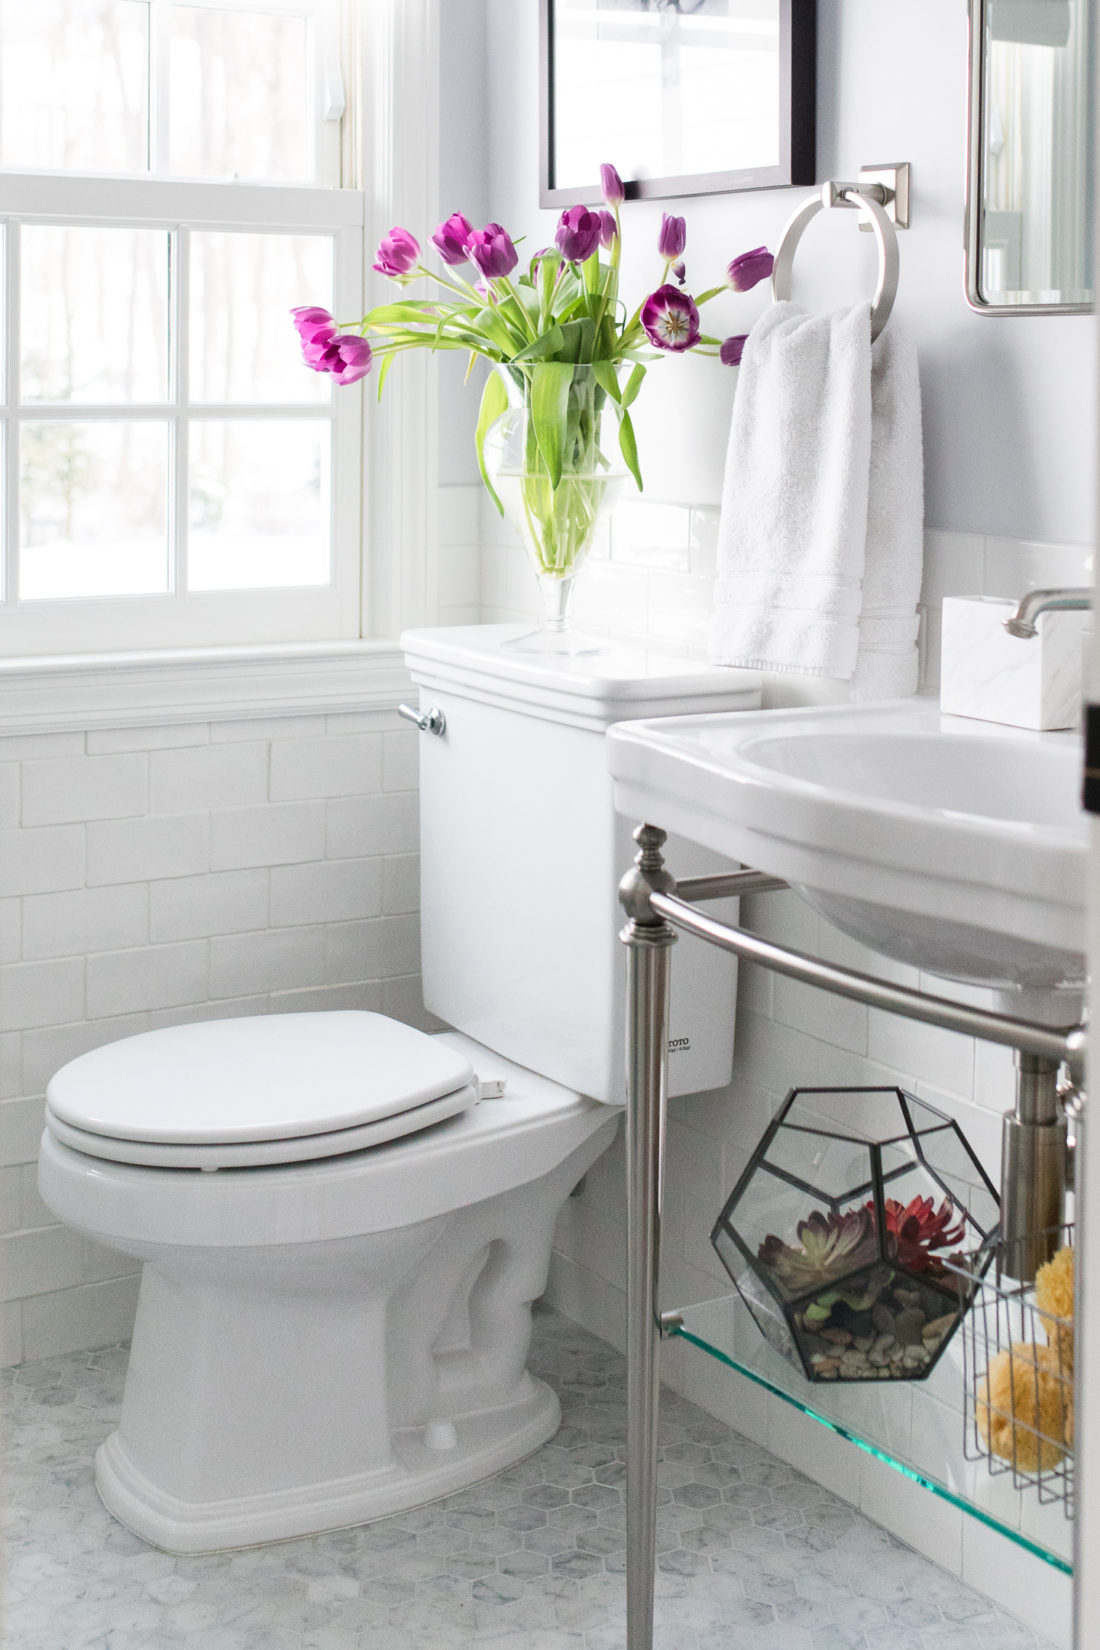 The bright white and chrome bathroom in Eva Amurri Martino's connecticut home, featuring irregular subway tile and marble hexagonal floor tiles